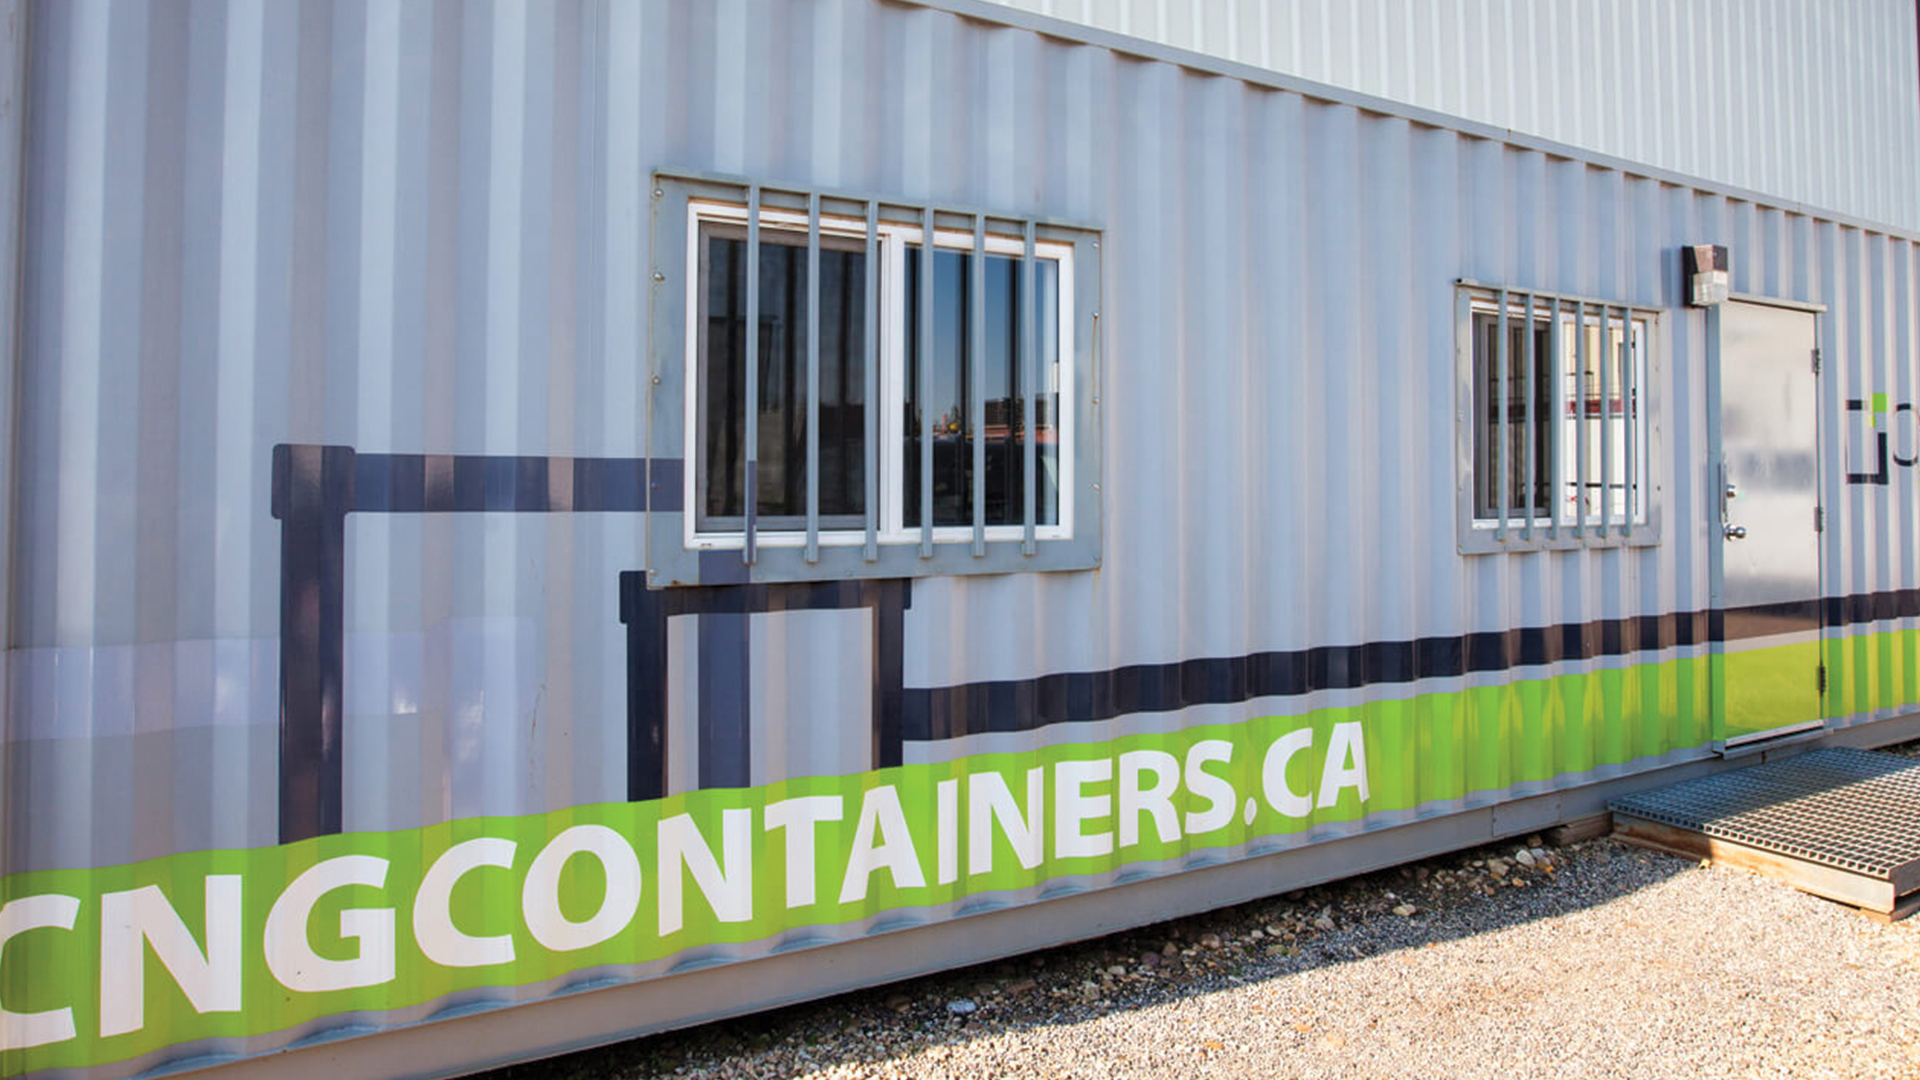 Exterior of container with CNG website printed on exterior